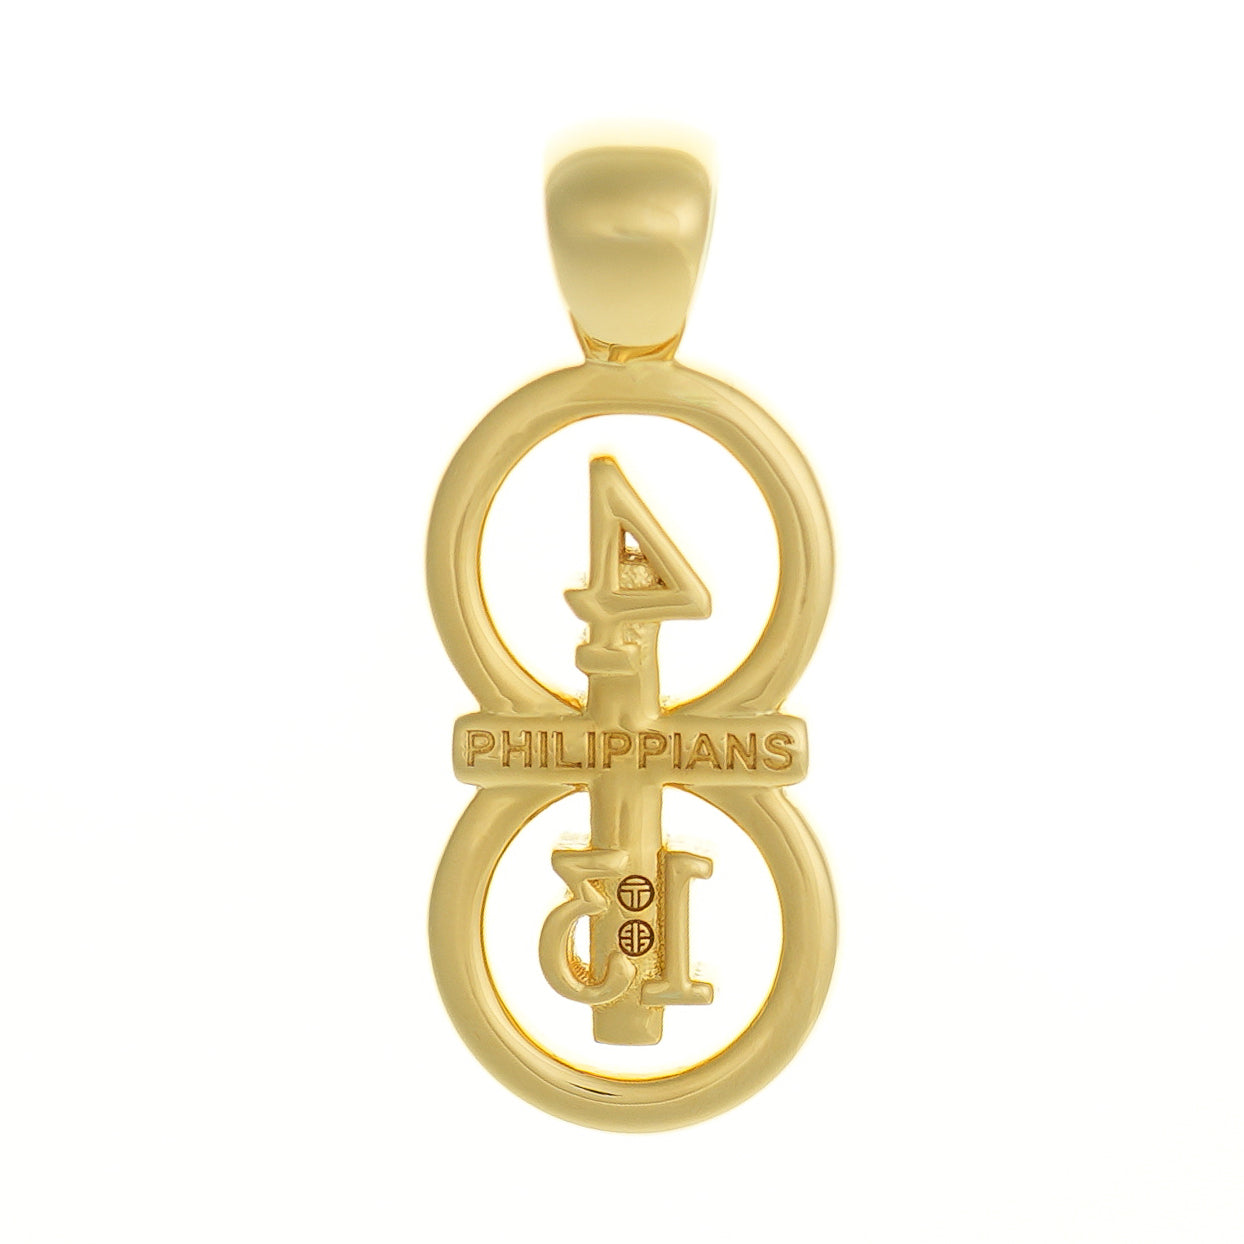 Back of the pendant shows the detail of the chapter name inscribed on the pendant and also the inscription of our logo tag so you know it is authentic. Our 29 and 11® pendant has the numbers 4 and 13 intertwined with the cross to represent Philippians 4:13 with the chapter word "Philippians" inscribed on the back.